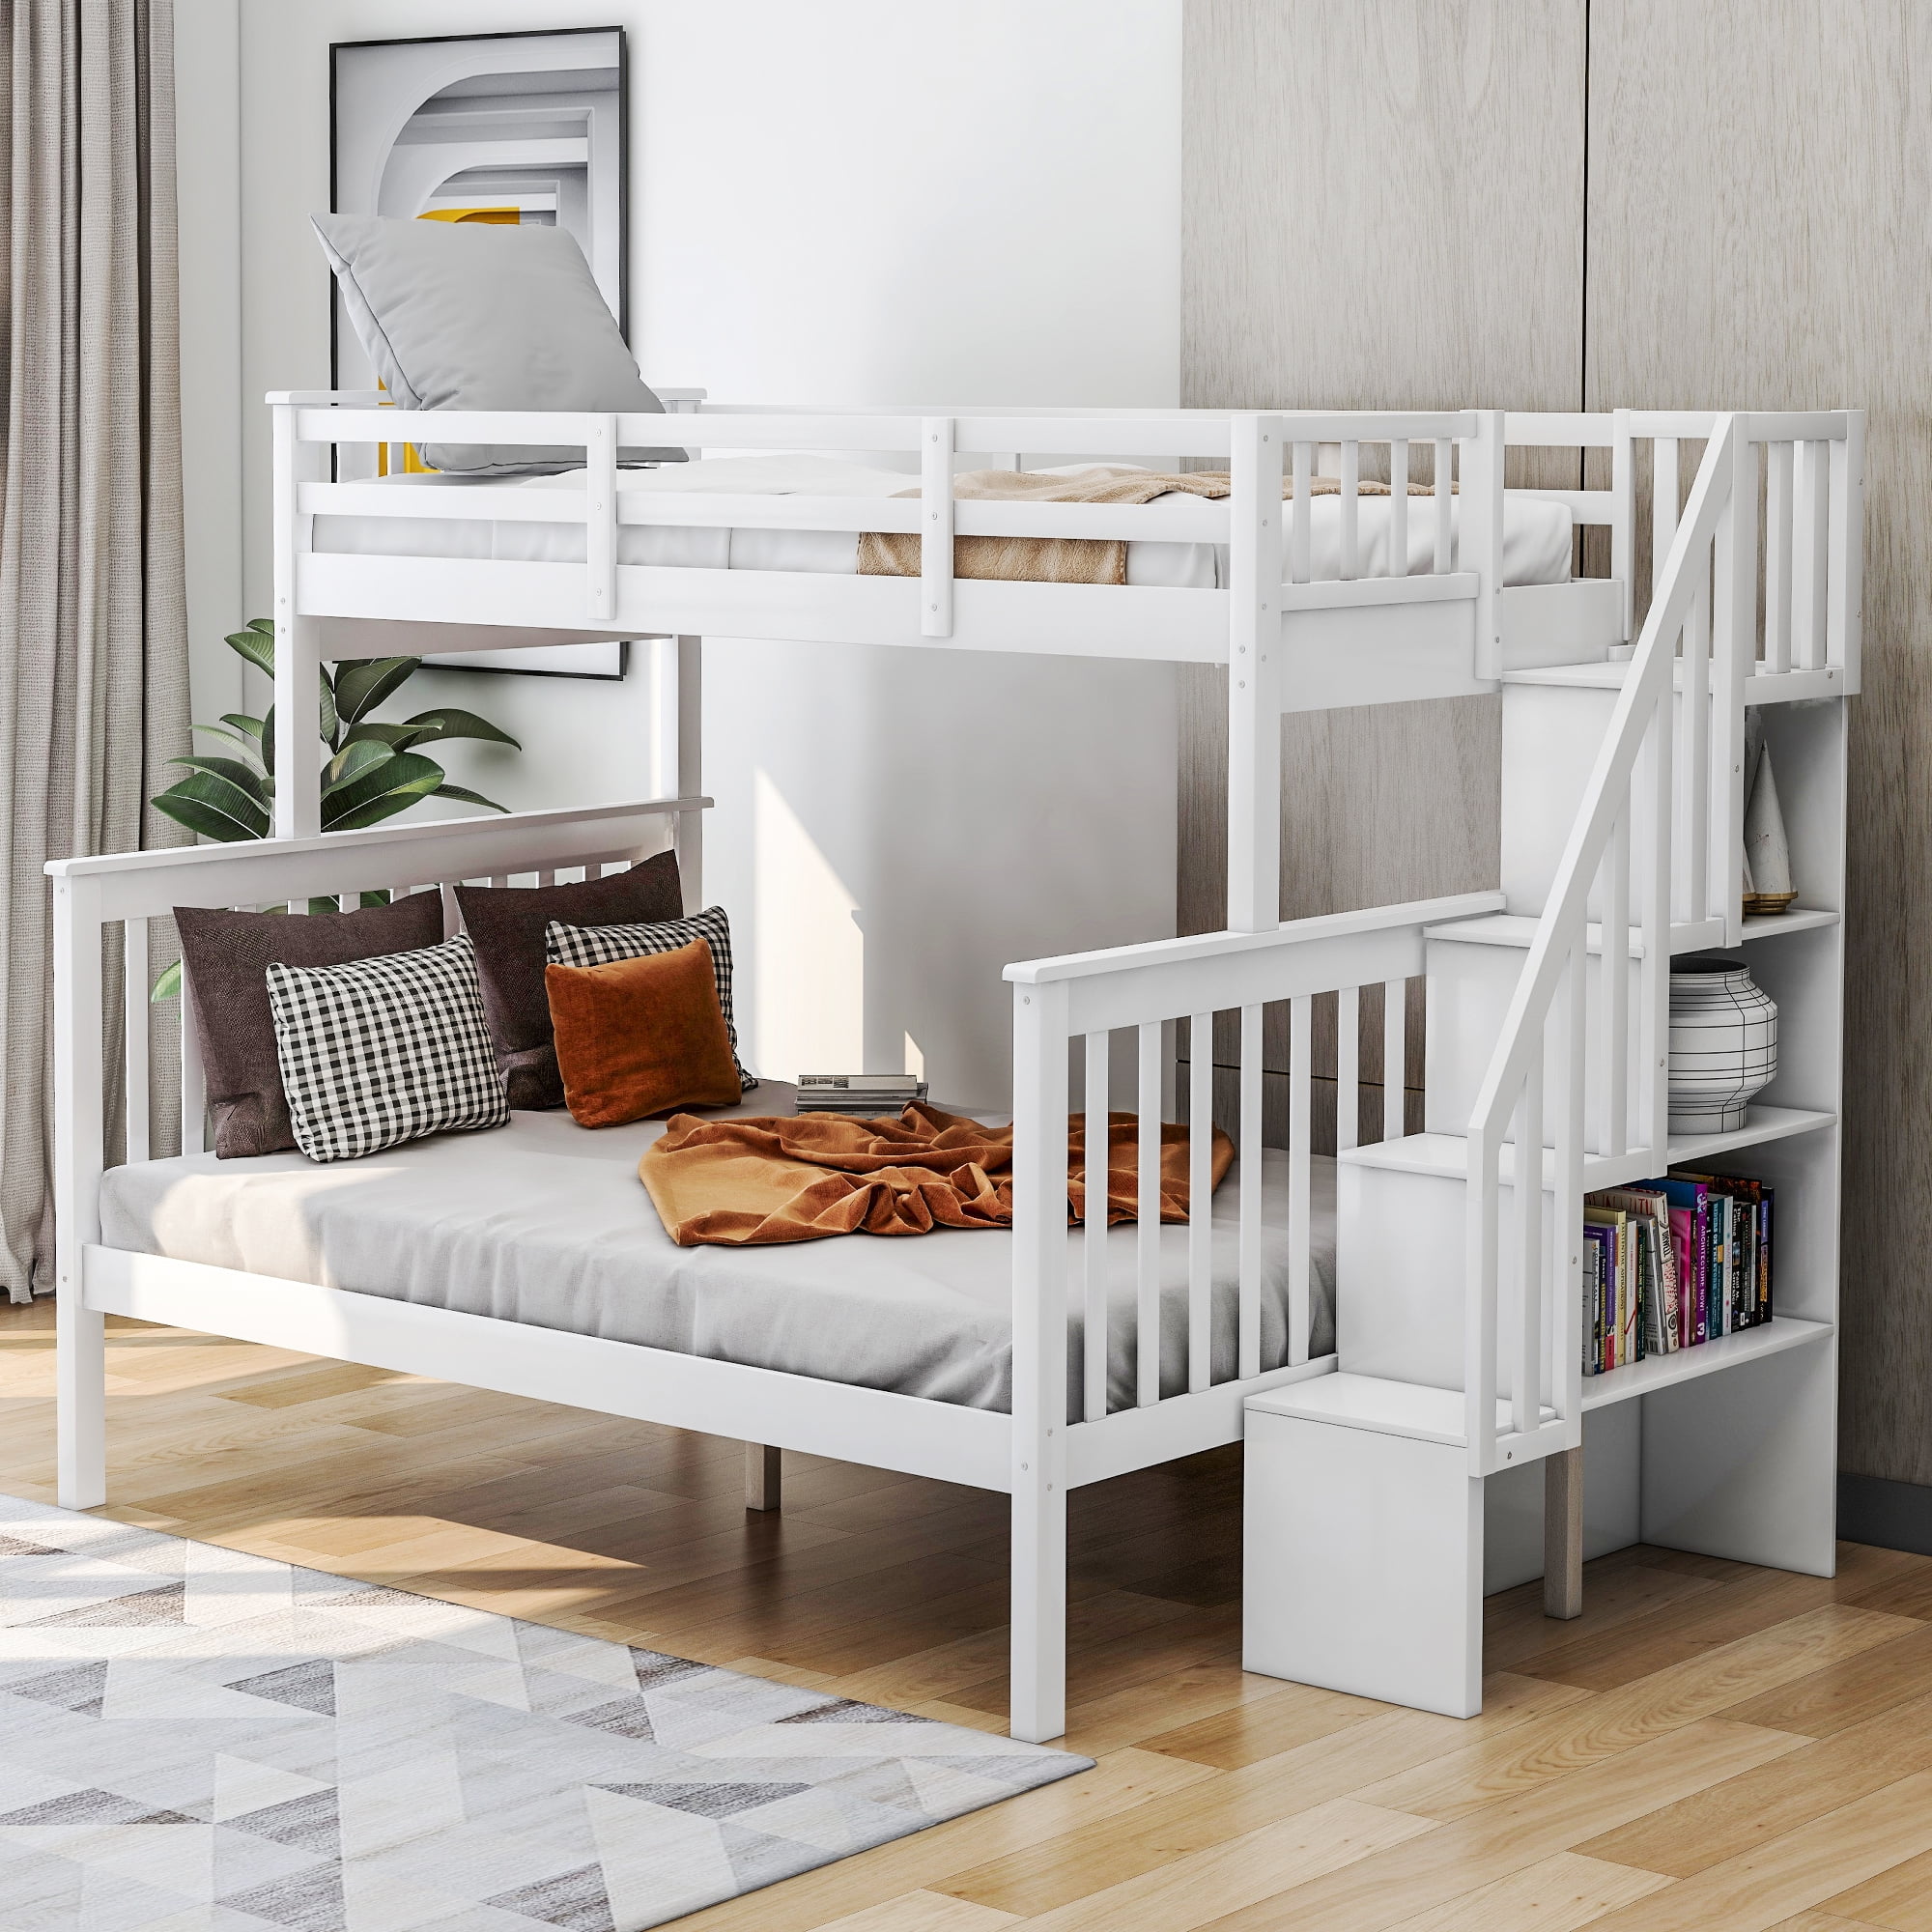 Twin Over Full Bunk Bed Frame Hardwood, Childrens Bunk Beds With Stairs